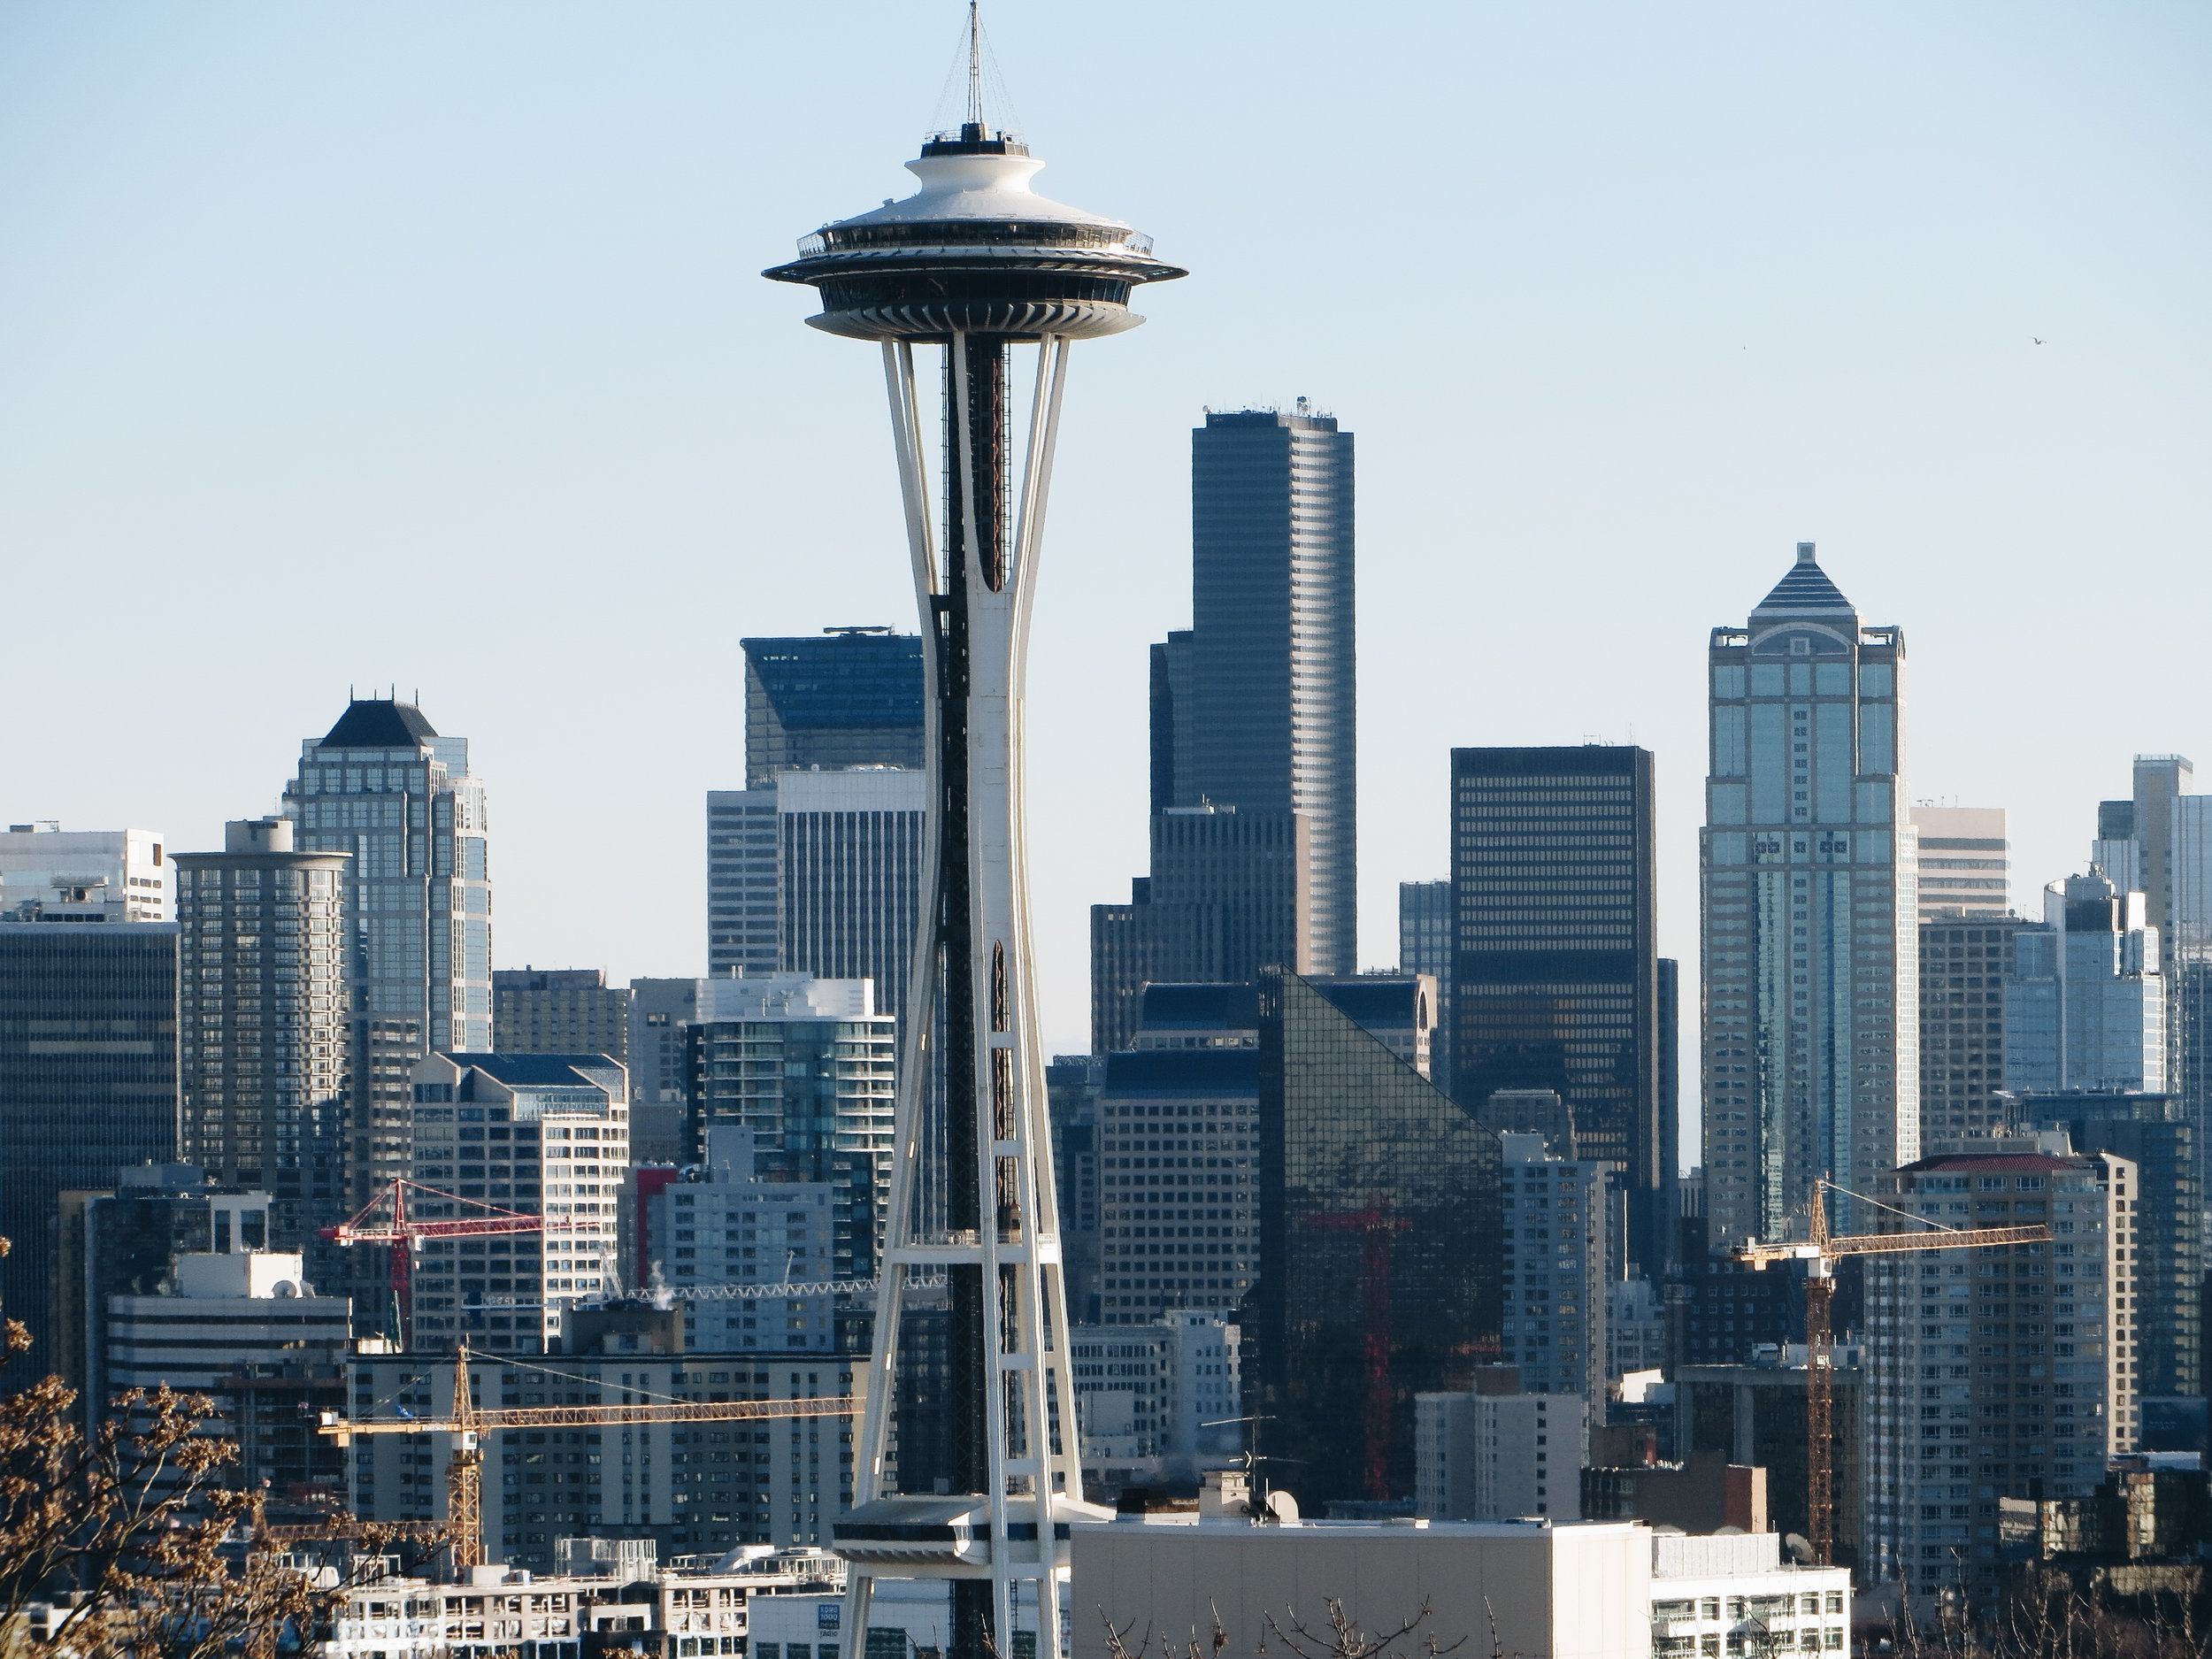 Insiders guide to seattle -space needle - www.letsregale.com - pacific northwest travel blogger 18.jpg